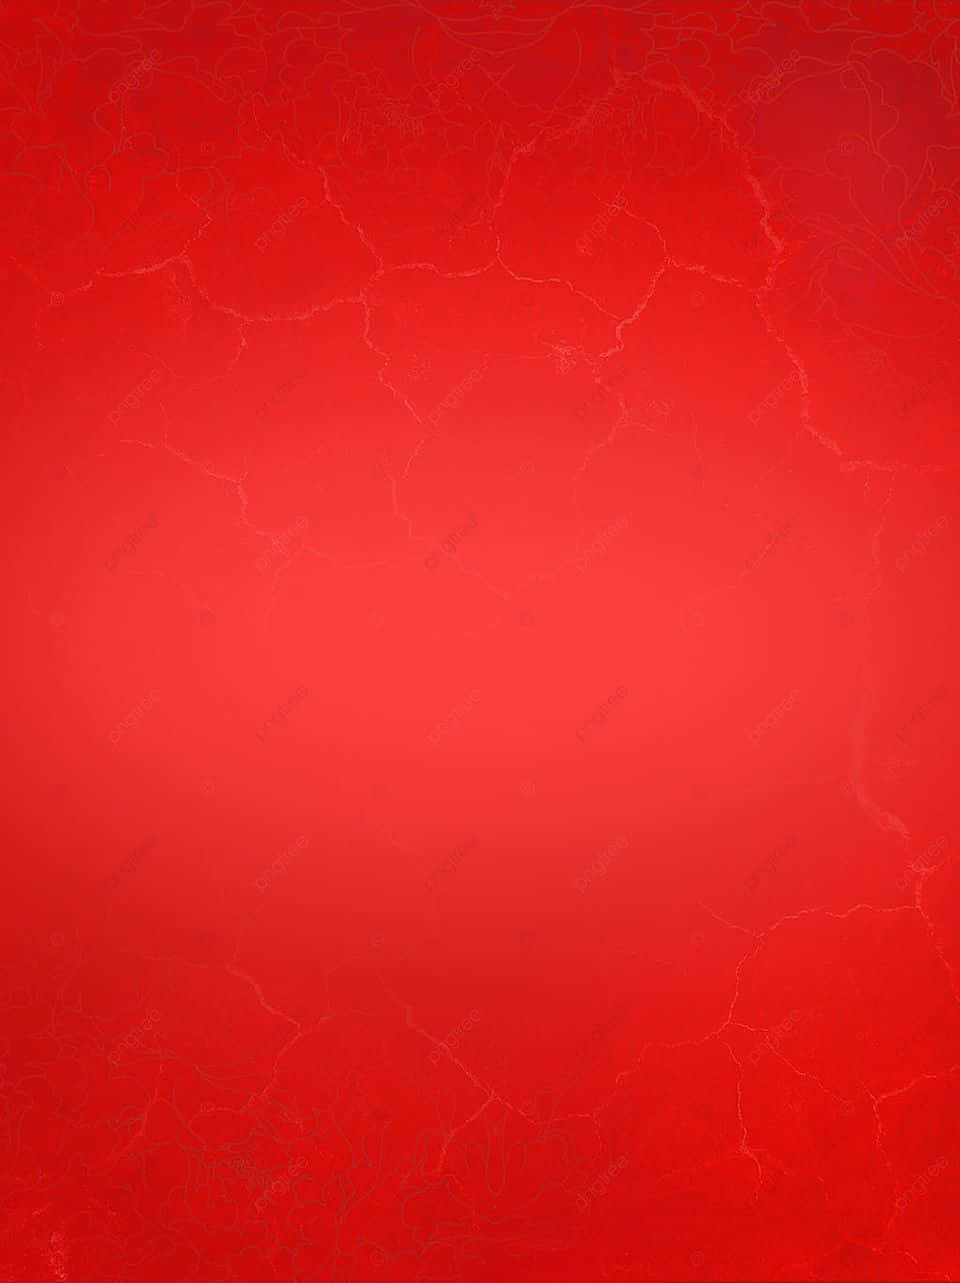 Vibrant Solid Red Background Wallpaper